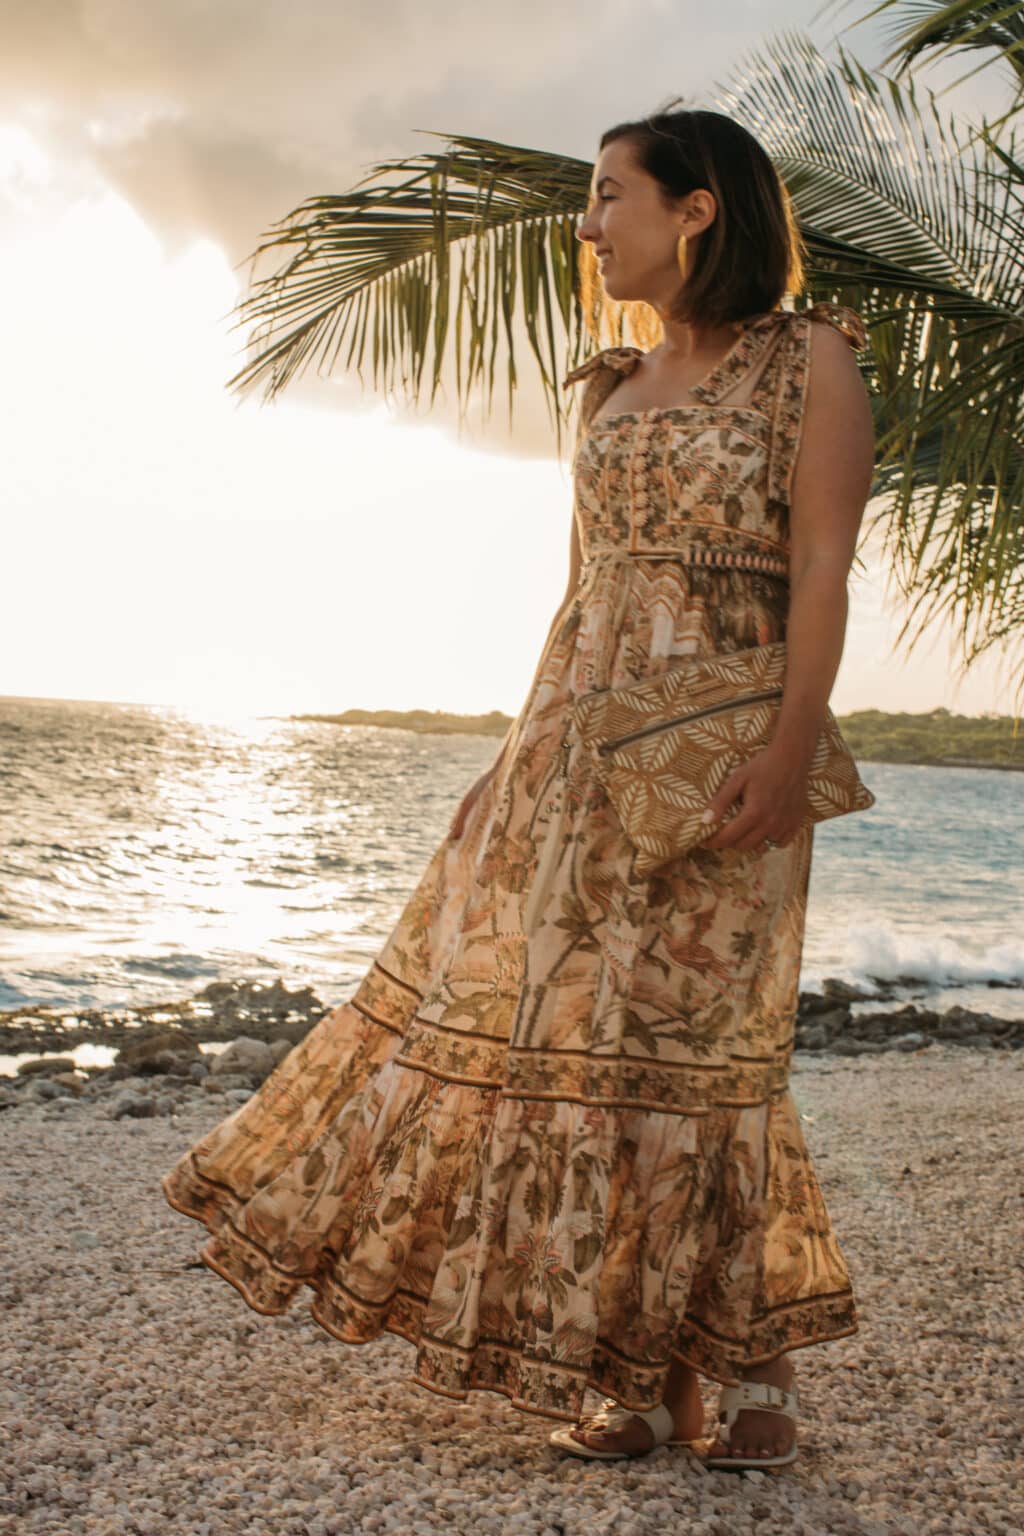 Lindsey of Have CLothes, Will Travel wearing a Zimmermann maxi dress, Carry Courage cork clutch, and Tory Burch sandals, standing on a rocky beach at sunset